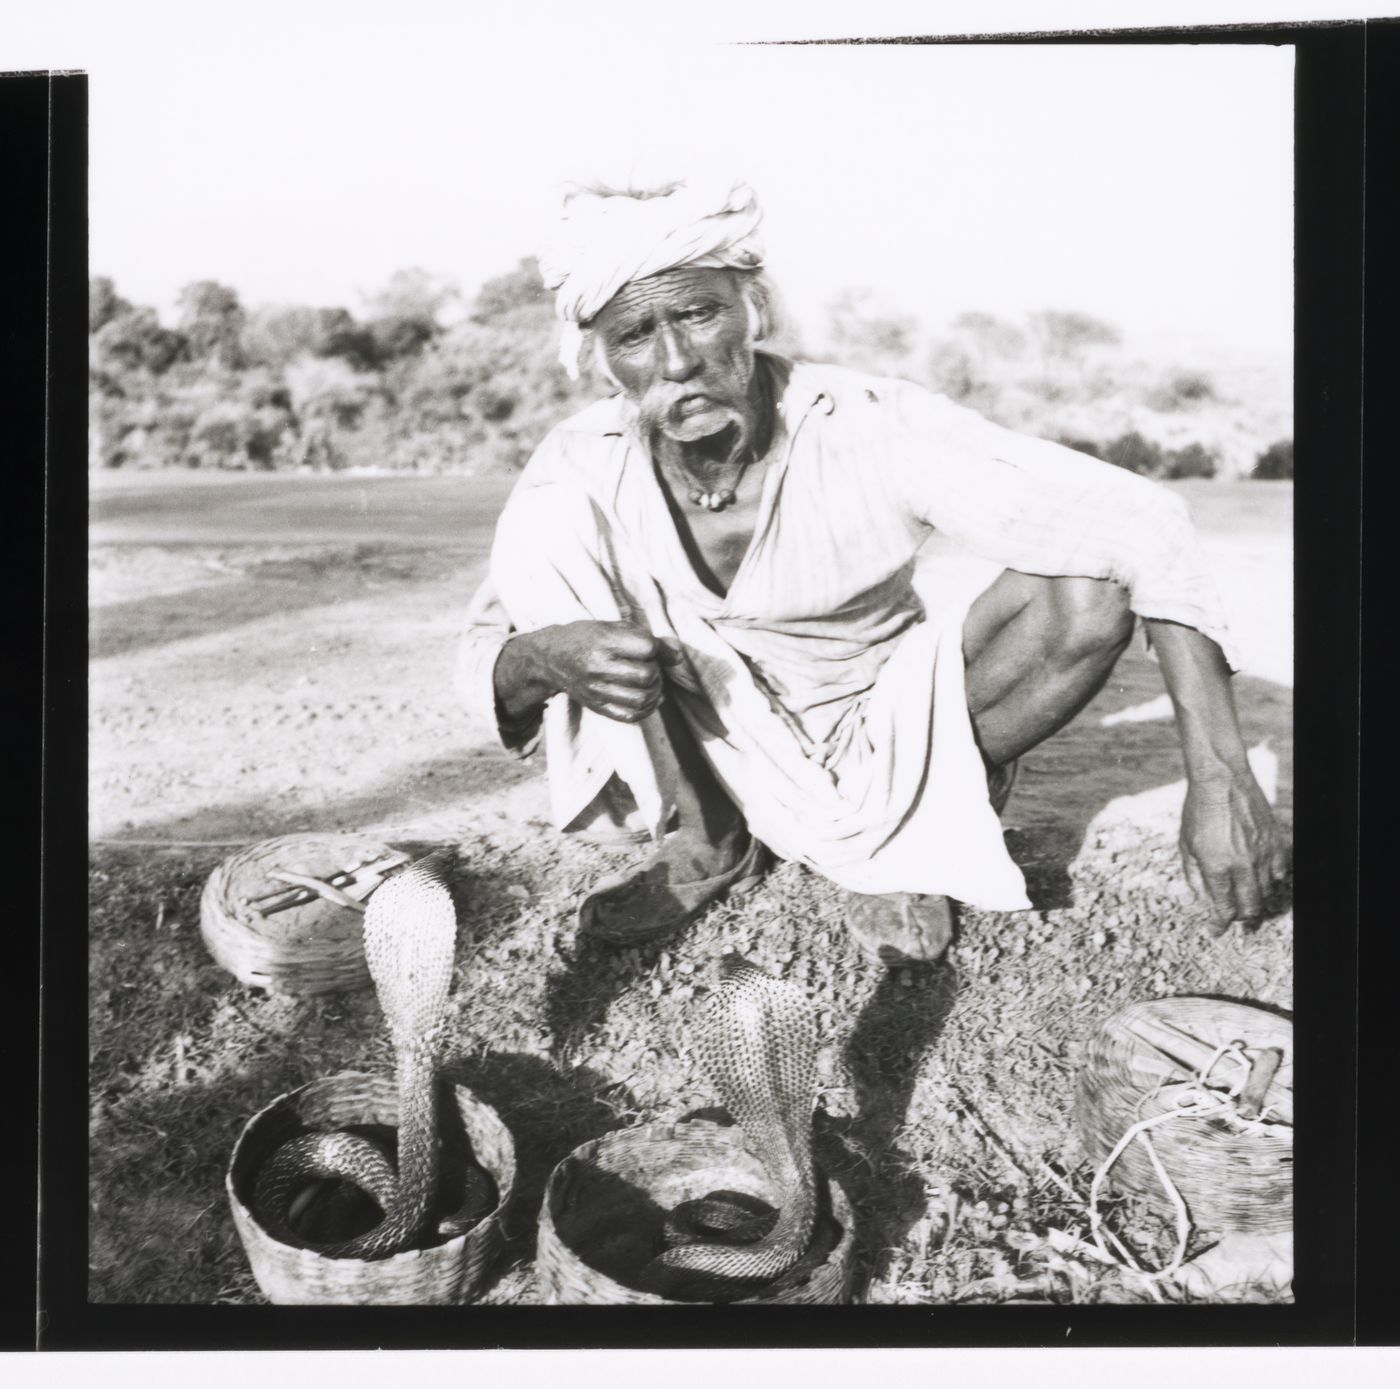 Snake charmer with two snakes near Chandigarh, India